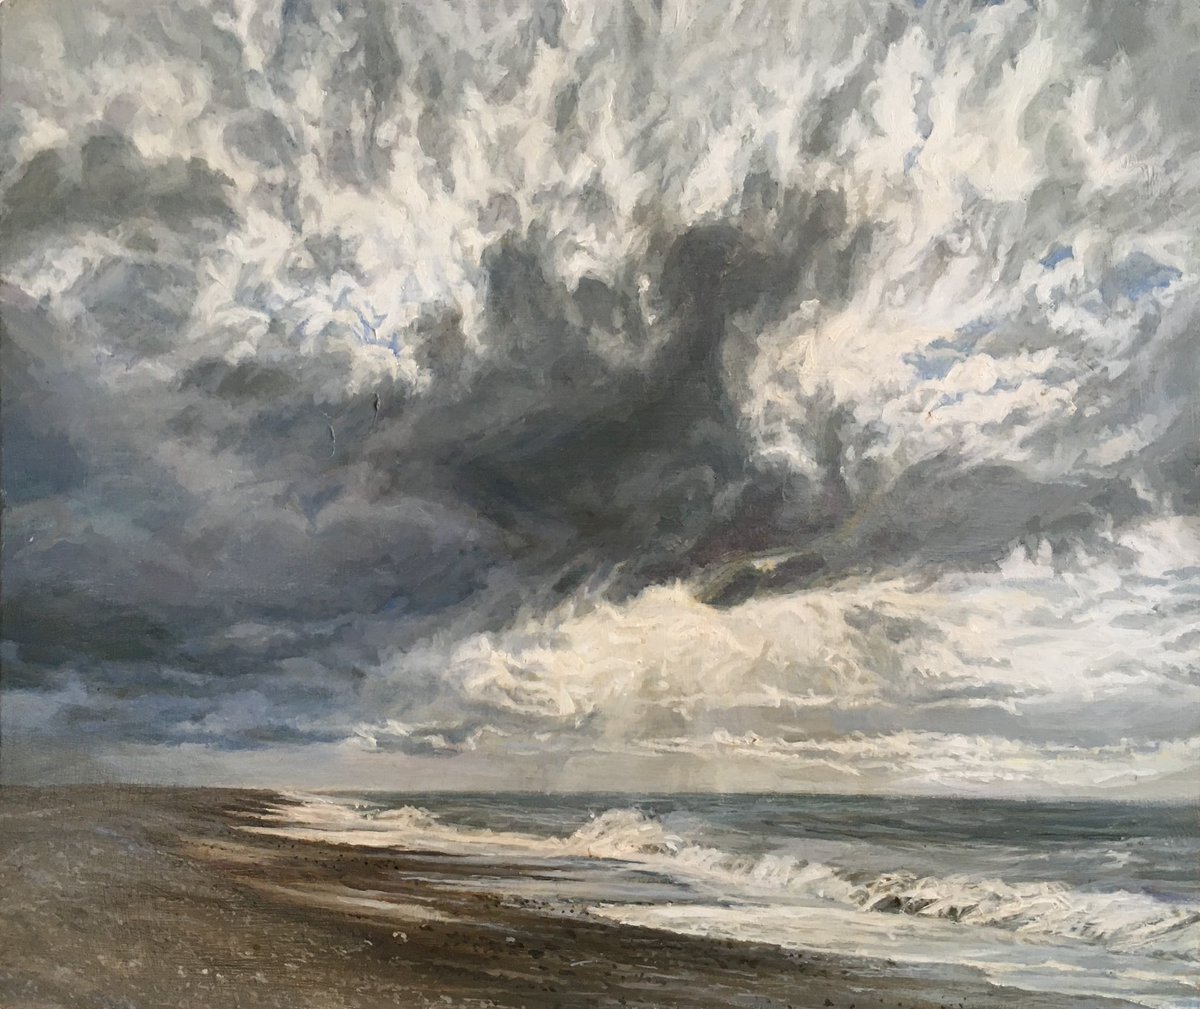 Cley Seascape. Oil on panel
#oilpainting #landscapeartist #painting #norfolk #clouds #beaches #seascape #exhibition 
bitly.ws/YRud